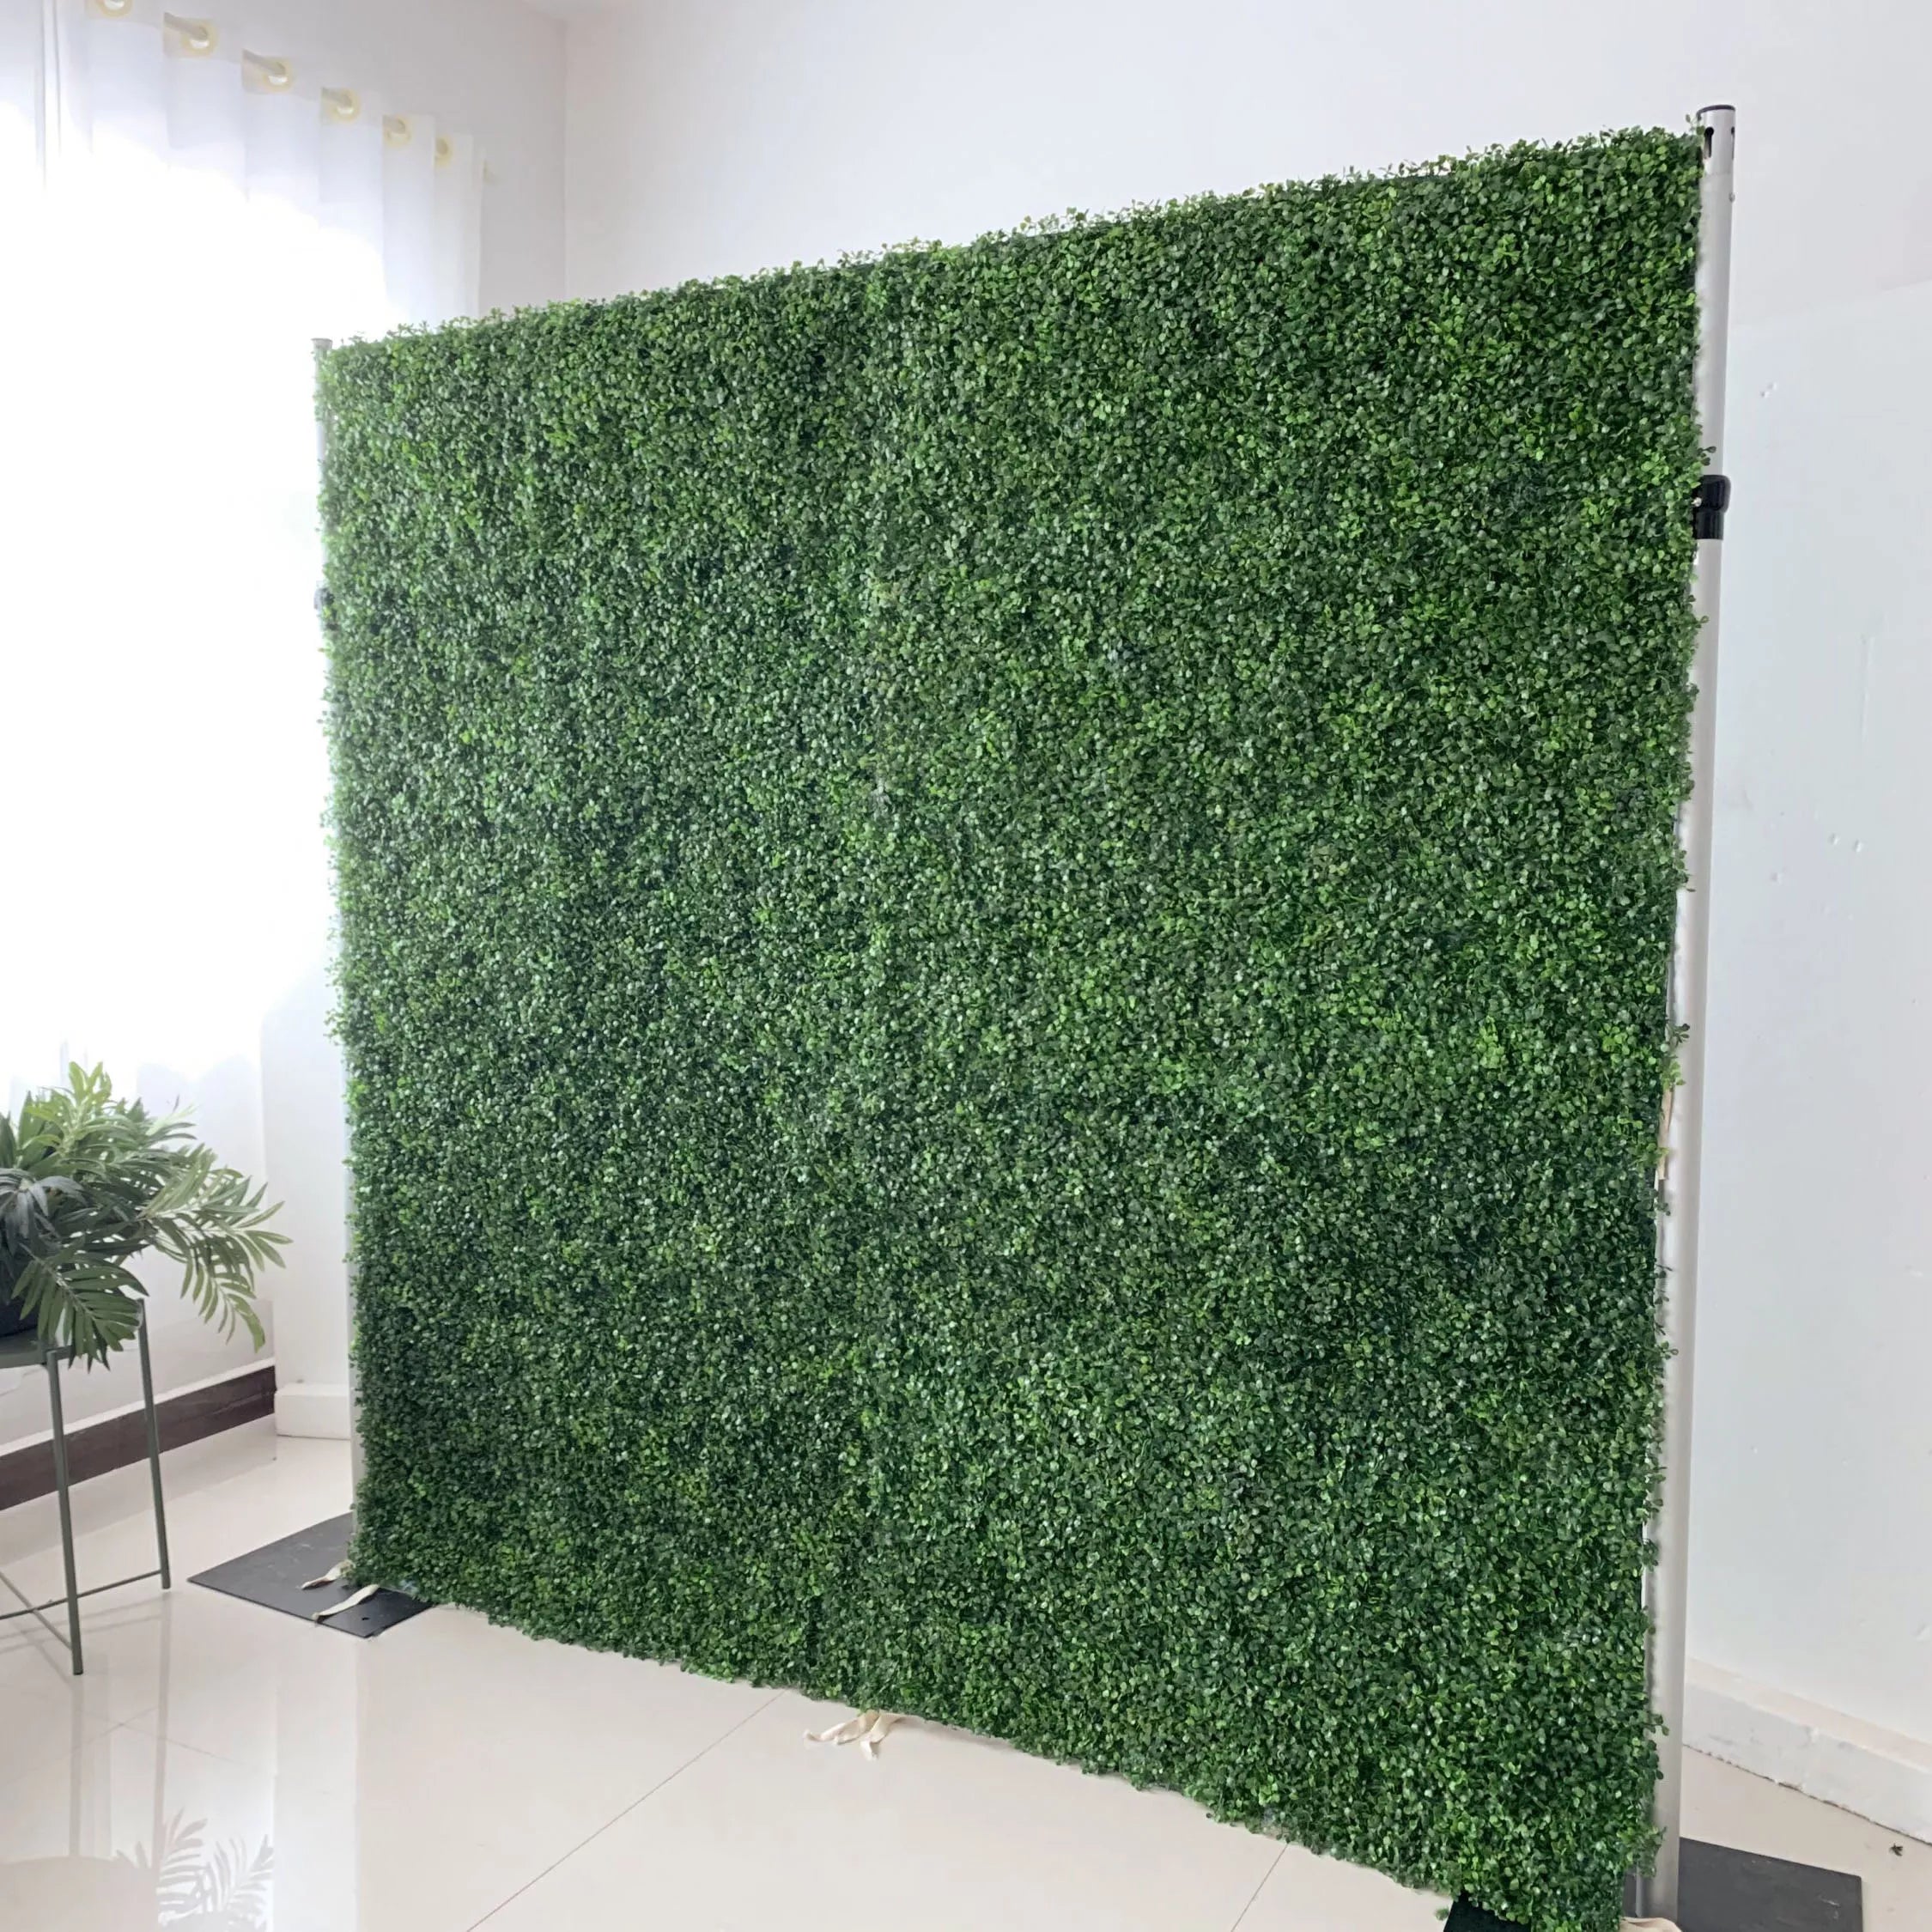 Valar Flowers Roll Up Fabric Artificial Green Grass Wall Wedding Backdrop, Floral Party Decor, Event Photography-VF-086